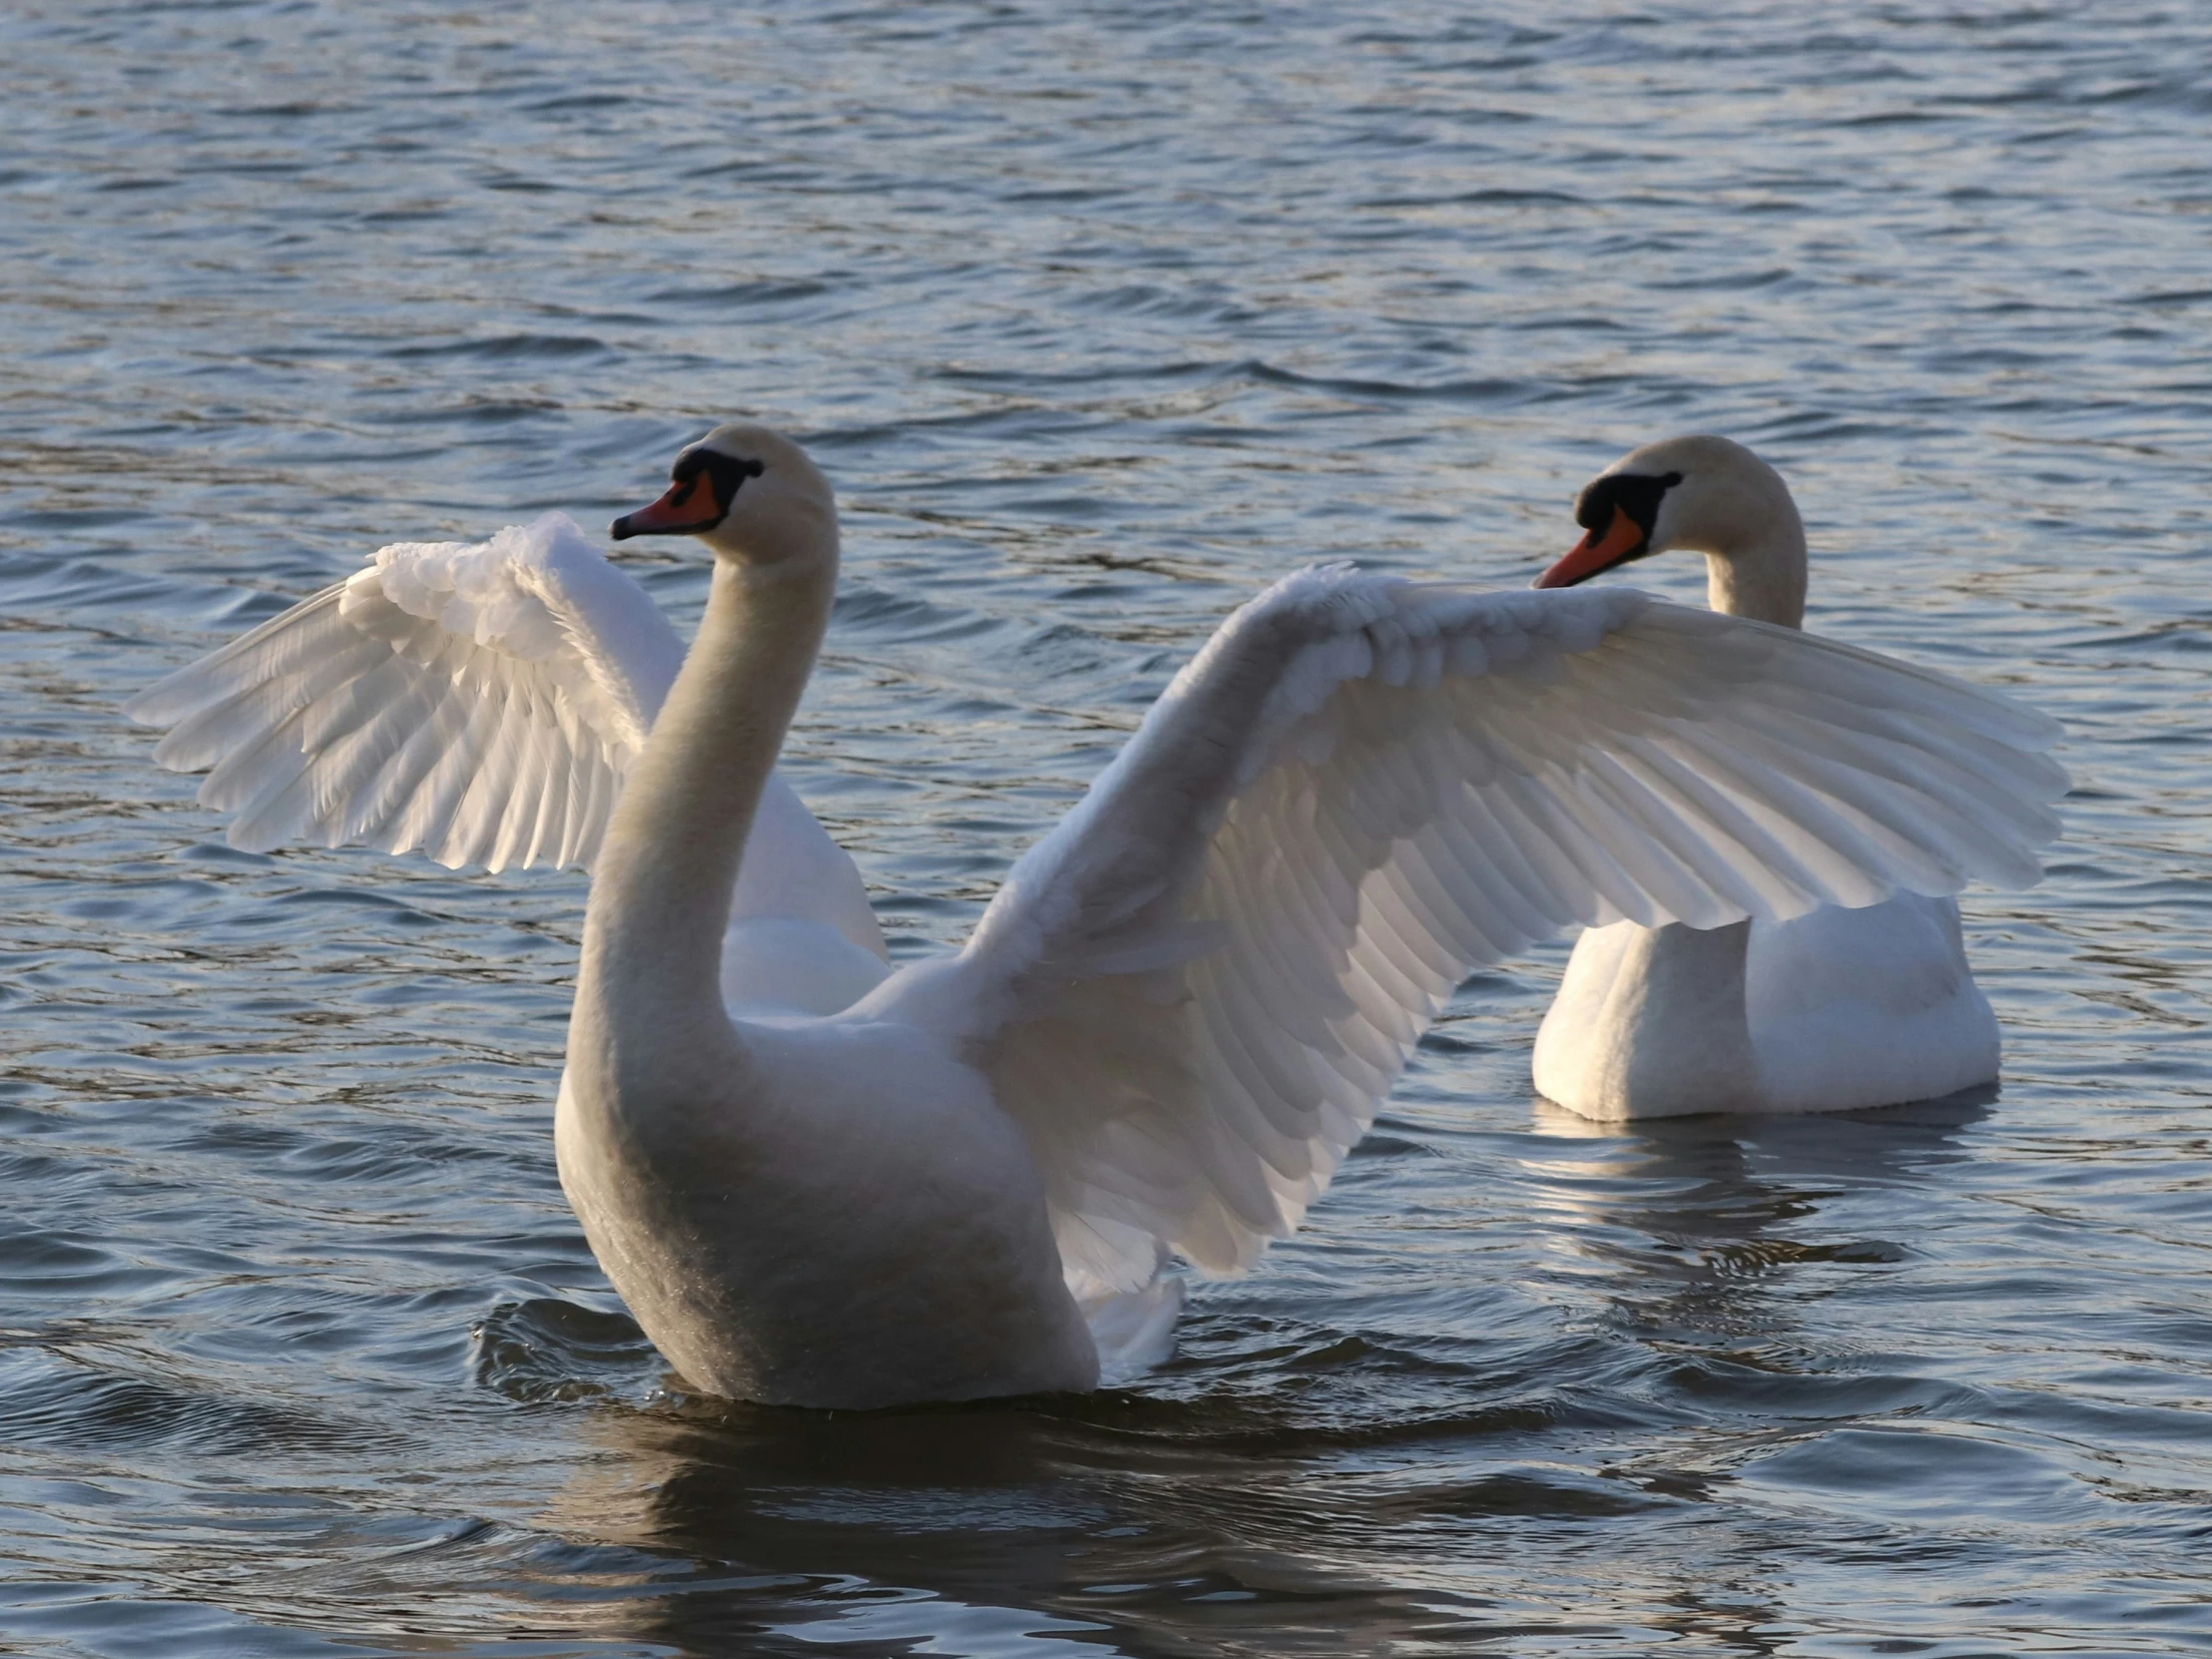 there are two swans swimming in the water